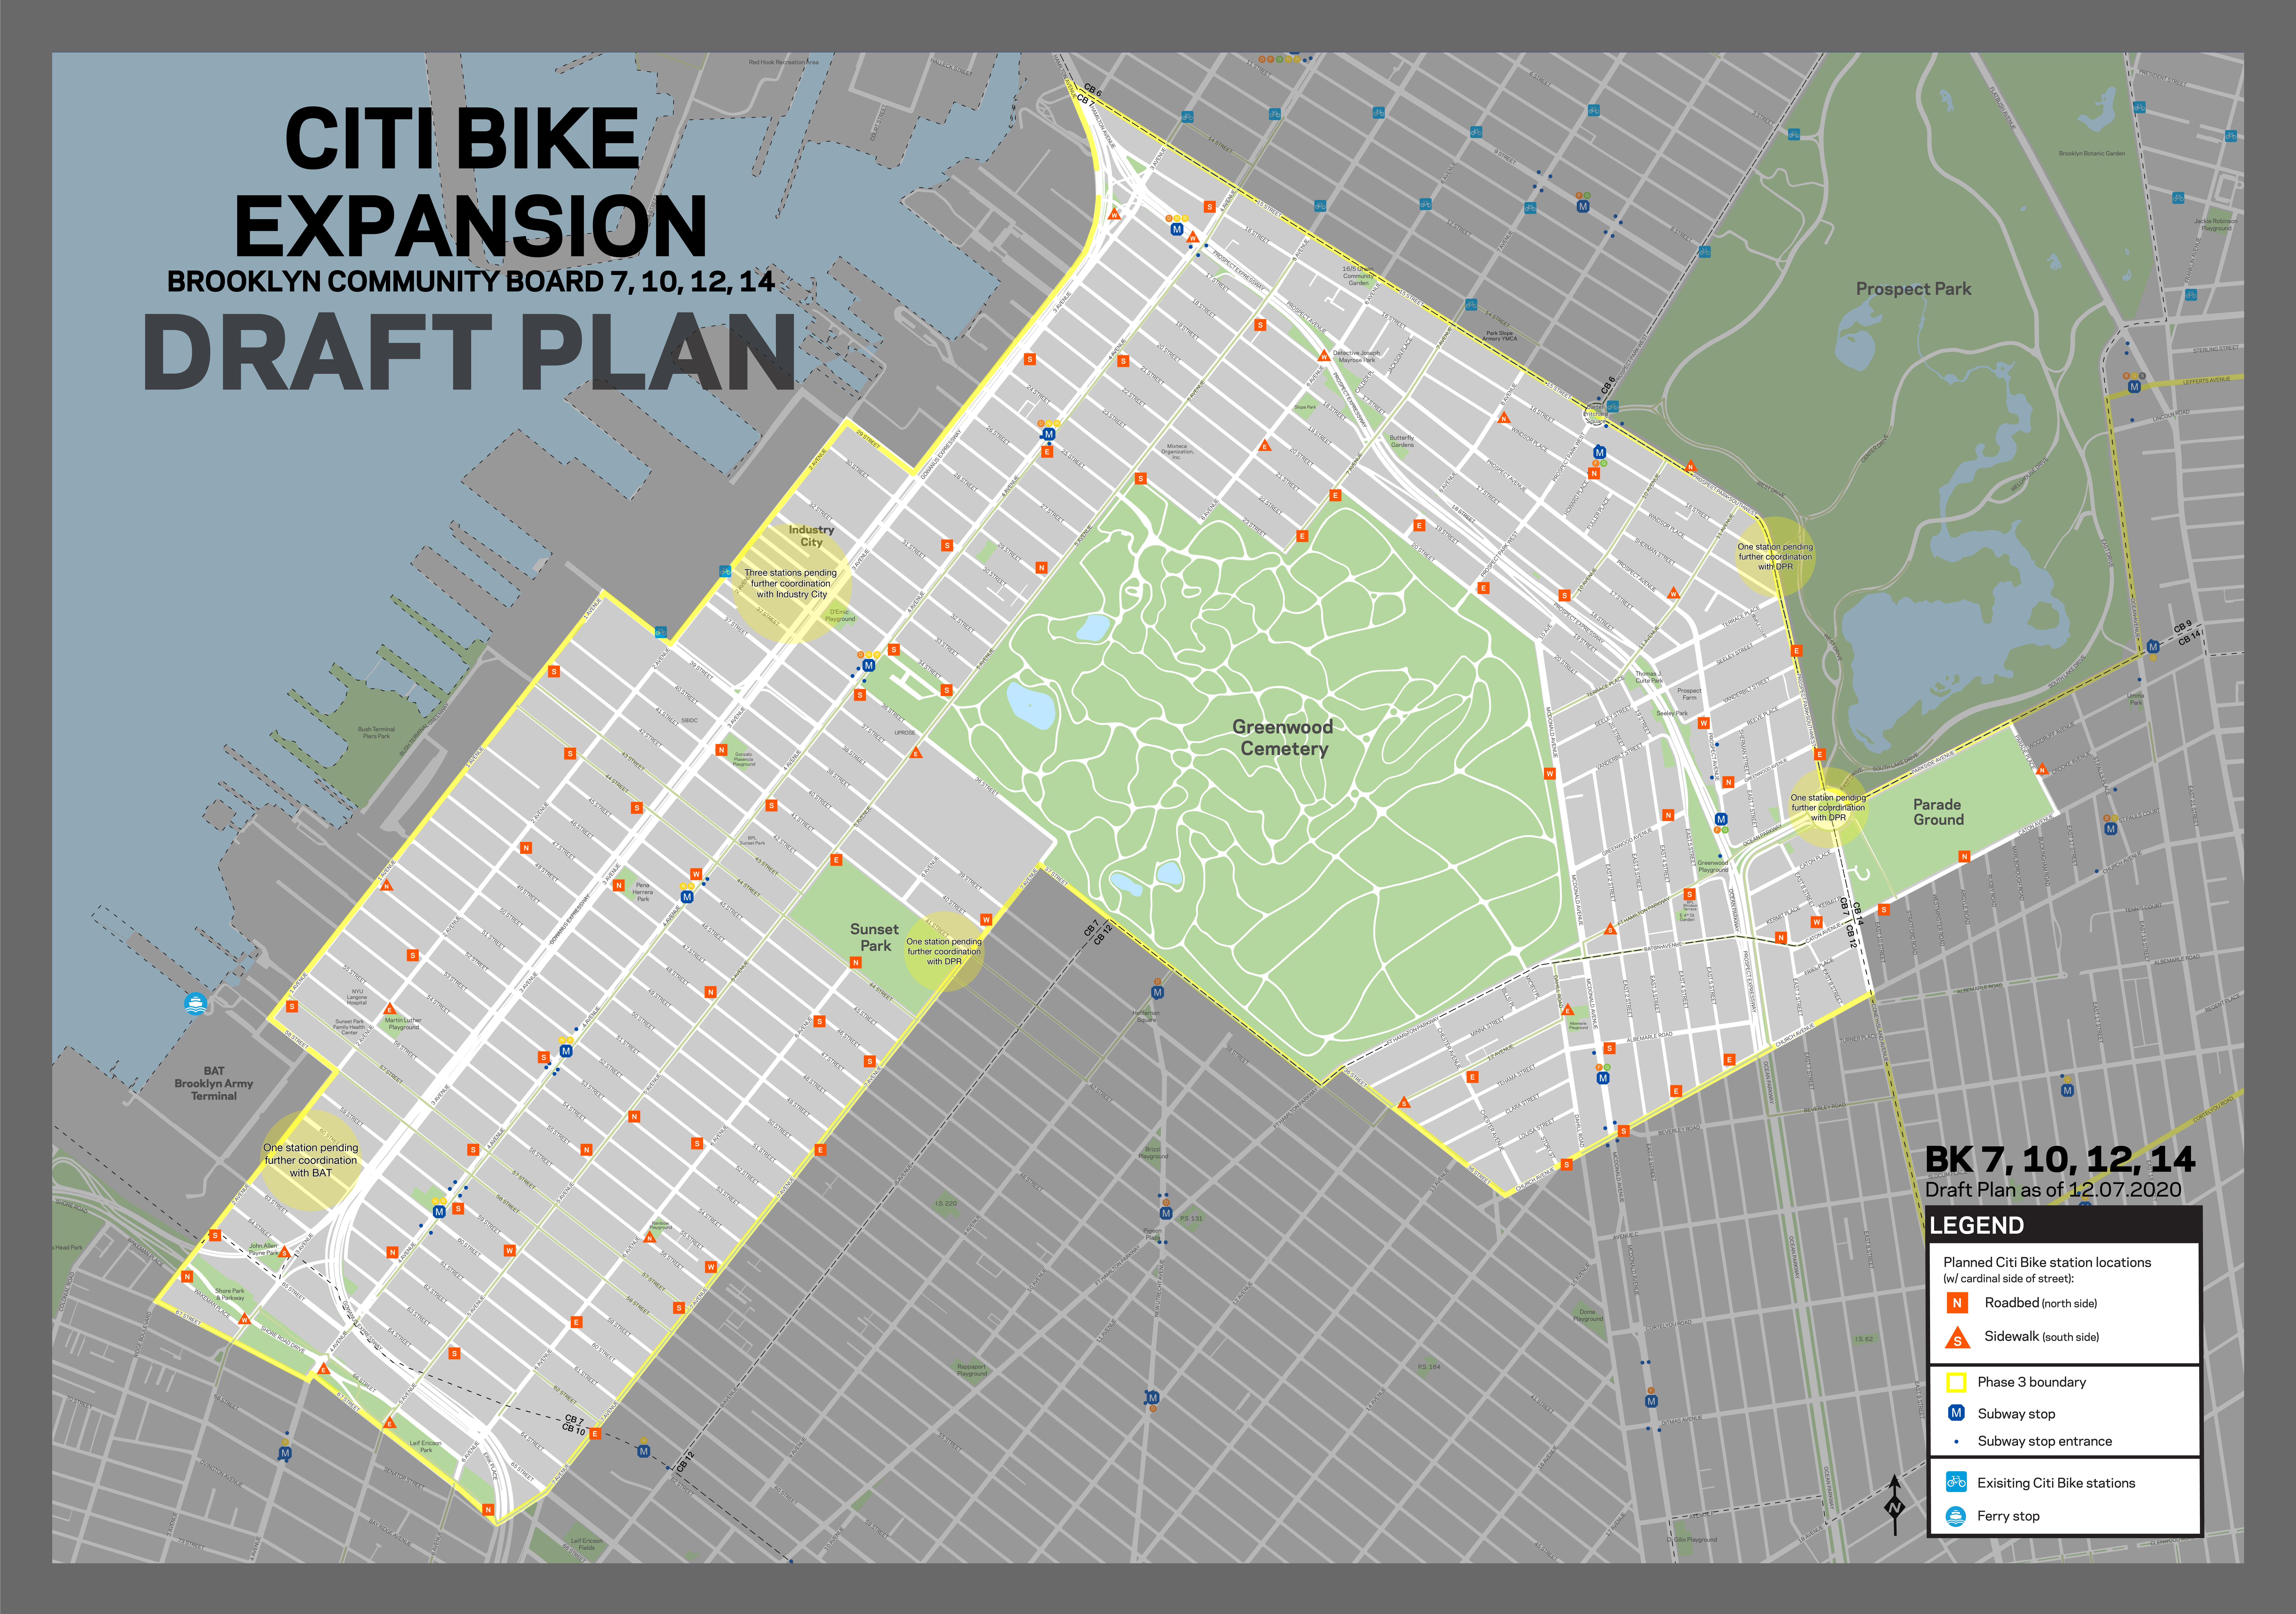 The draft plan for Brooklyn Community Boards 7, 10, 12, and 14